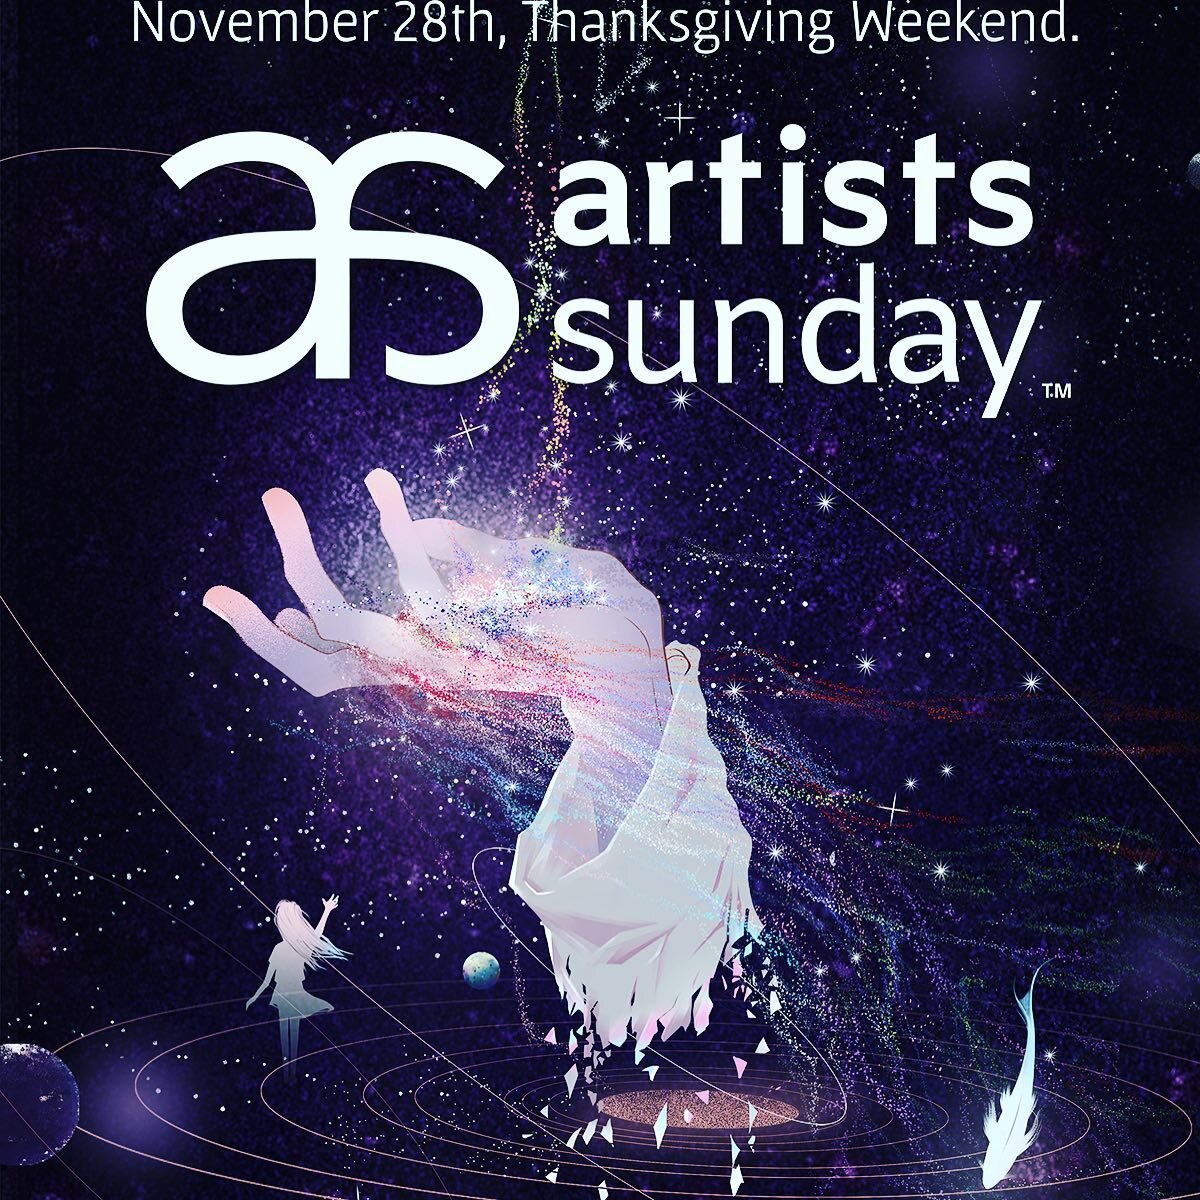 Save the Date: Sunday November 28th. We have so much in store for Artists Sunday! More details coming soon. #upfrontartspace #artistsunday2021 #artistsunday #dtcfpartnership #cuyahogafallsartgallery #cuyahogafallsartist #supportlocalartists #buyartfo